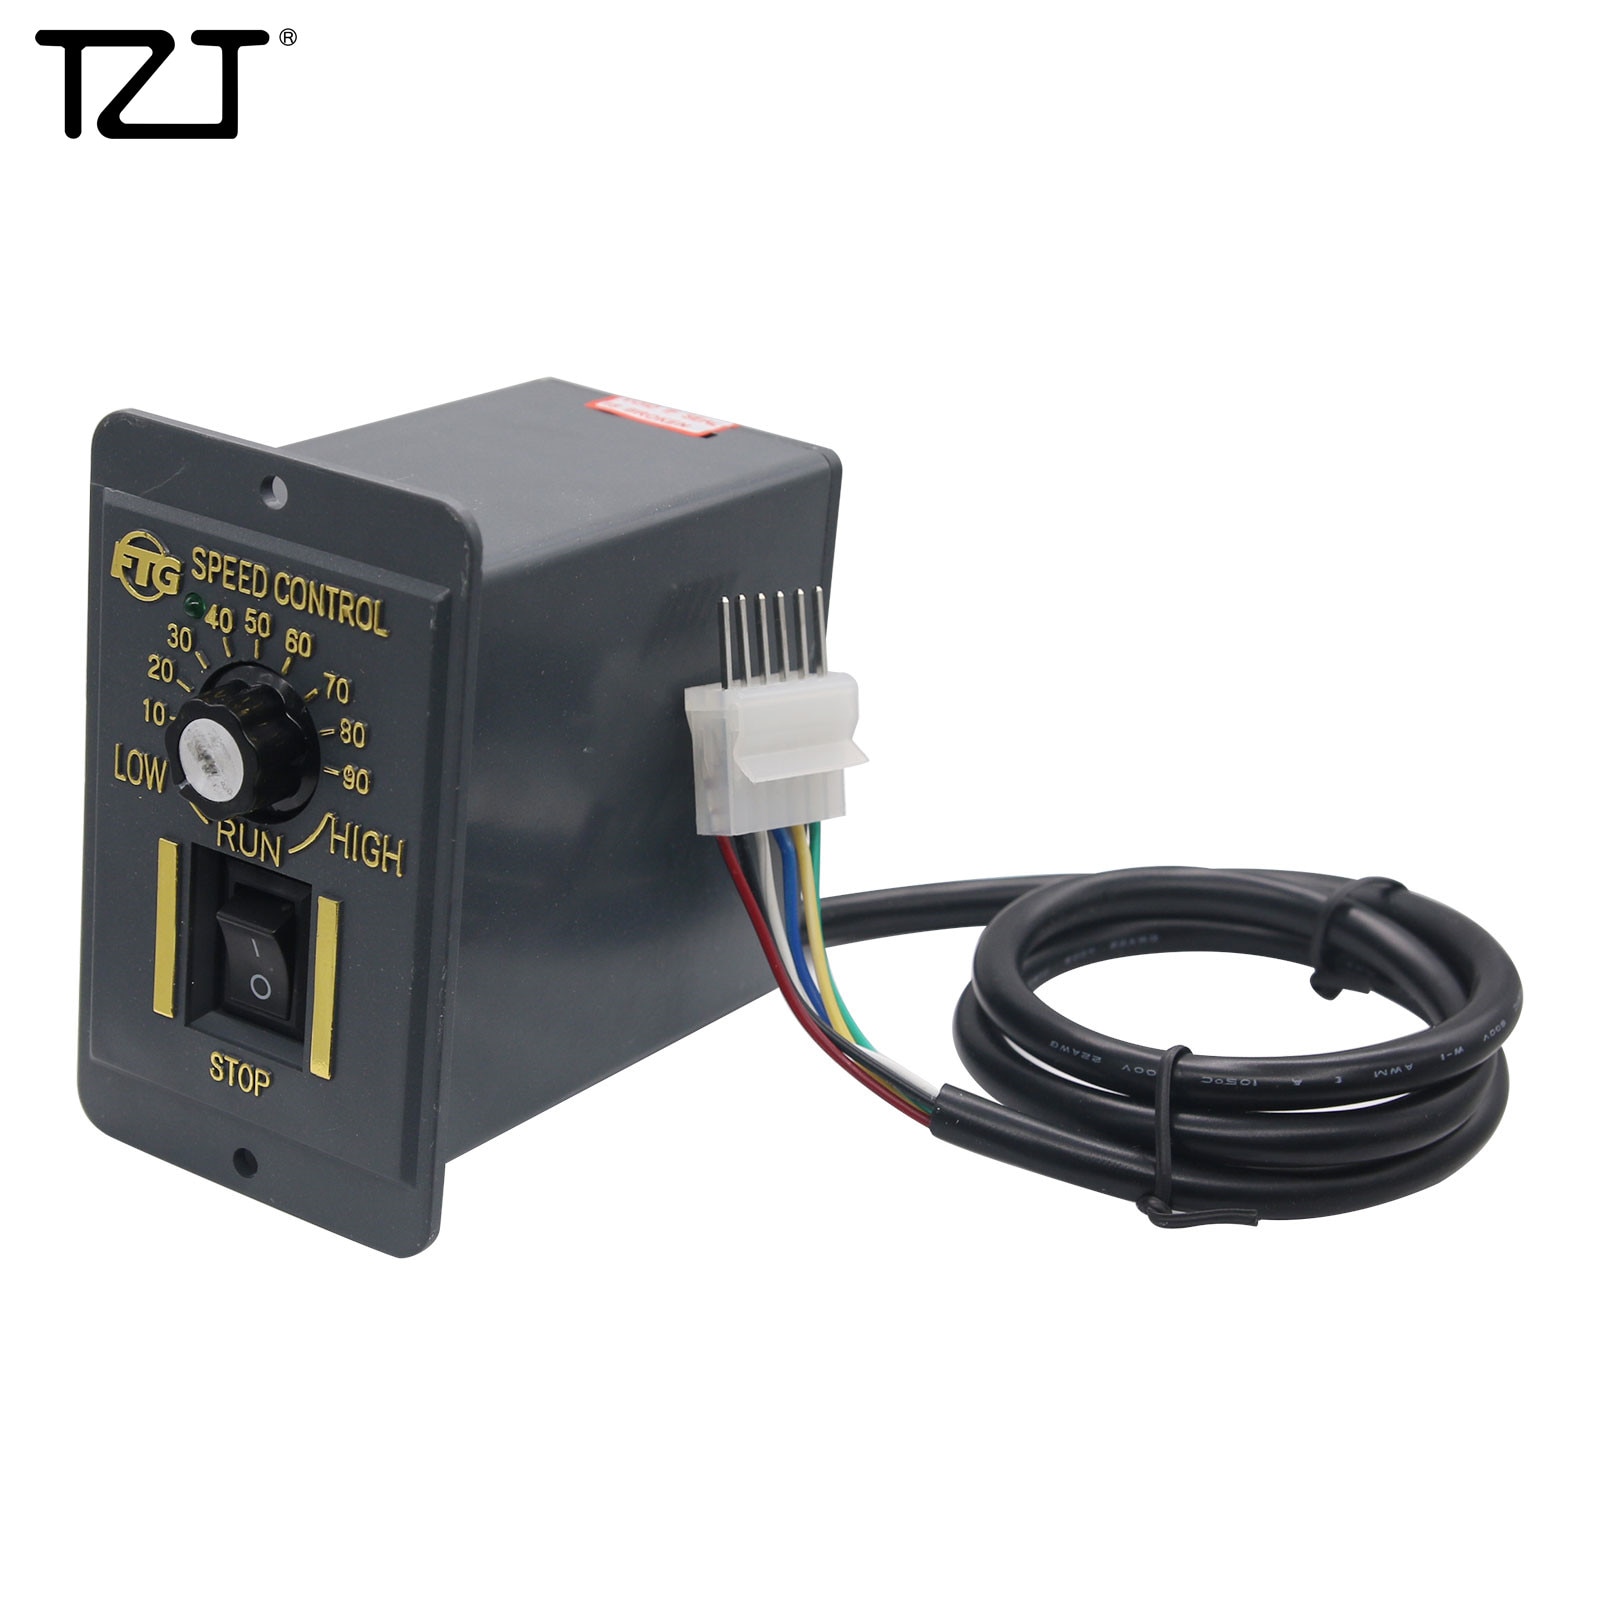 Tzt Ac 220V Pwm Motor Speed Controller 200W Variabele Frequentie Converter